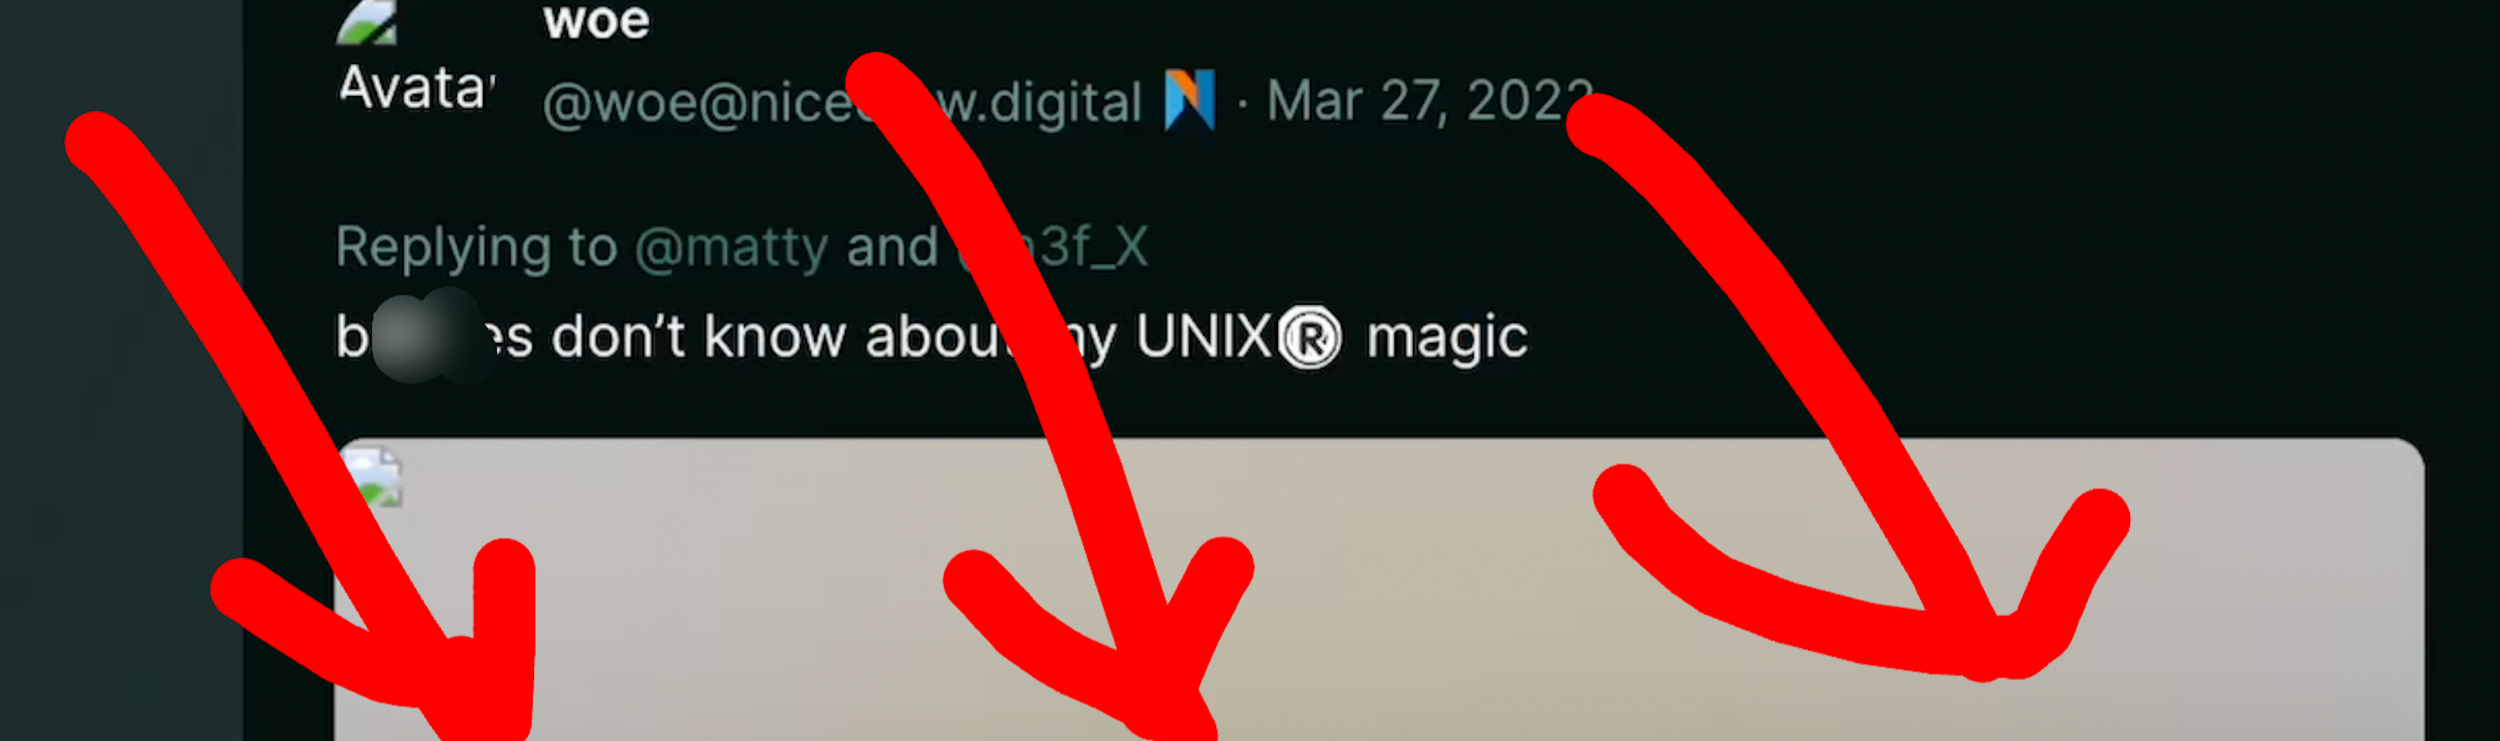 Dumperth: "B*tches don't know about my UNIX magic"